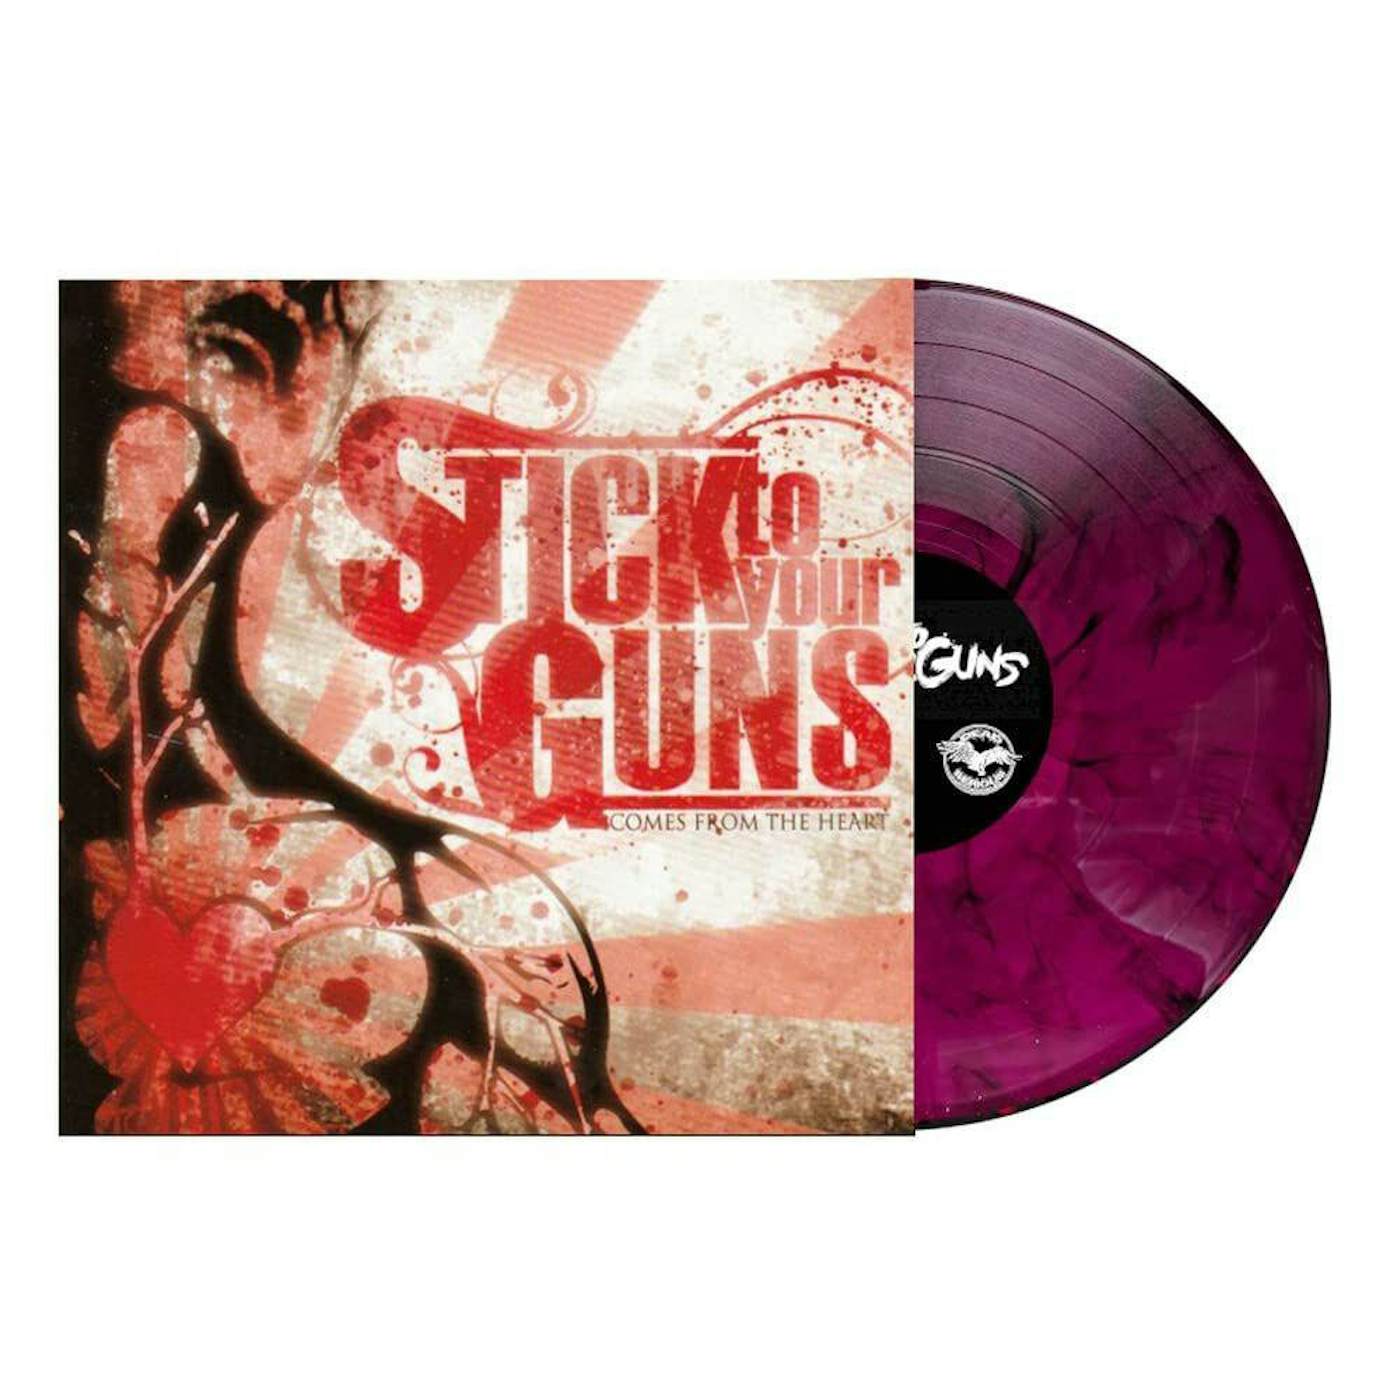 Stick To Your Guns COMES FROM THE HEART (MAGENTA/BLACK SMOKE VINYL) Vinyl Record